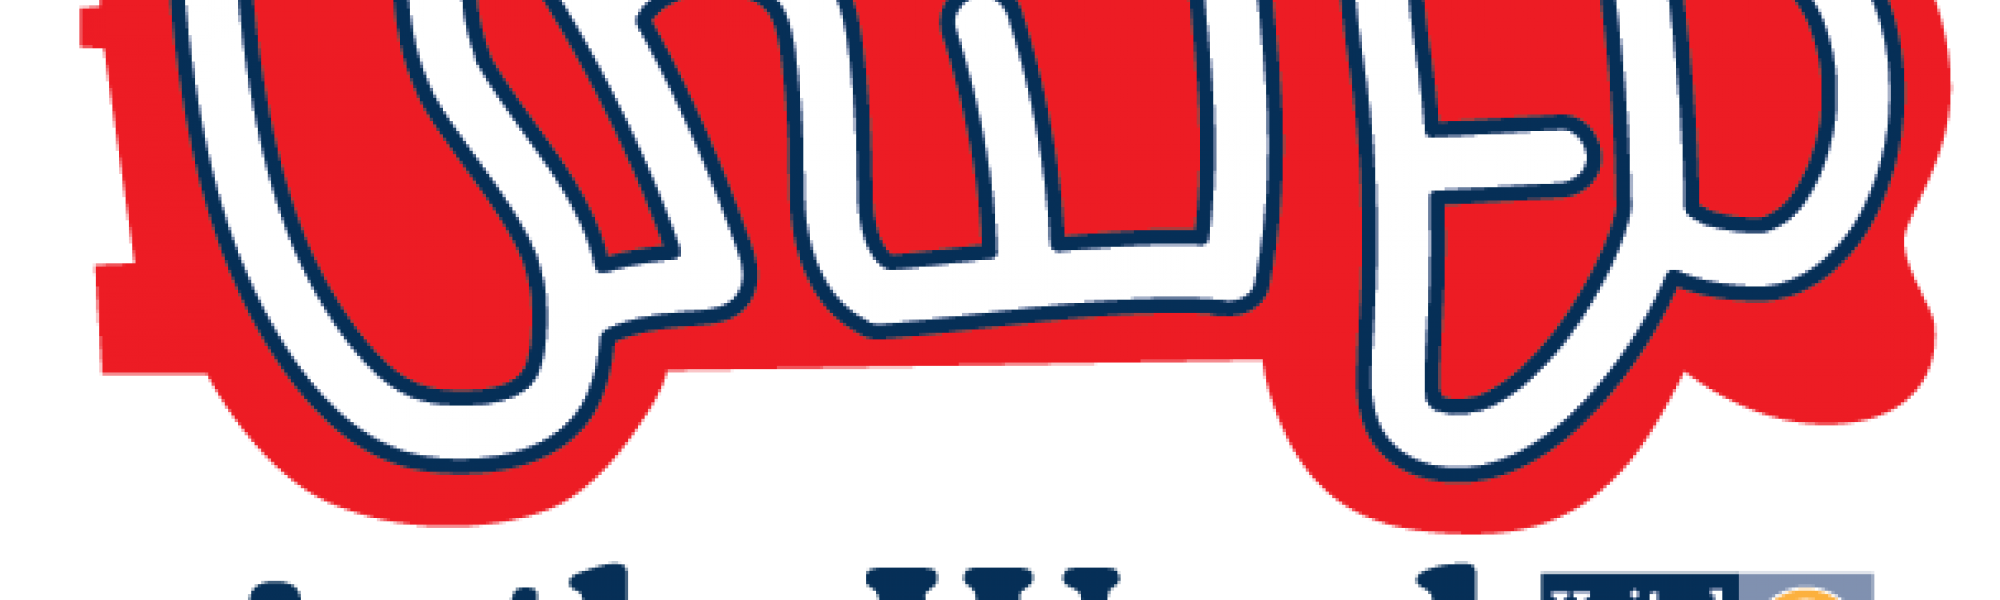 United is the Word campaign logo